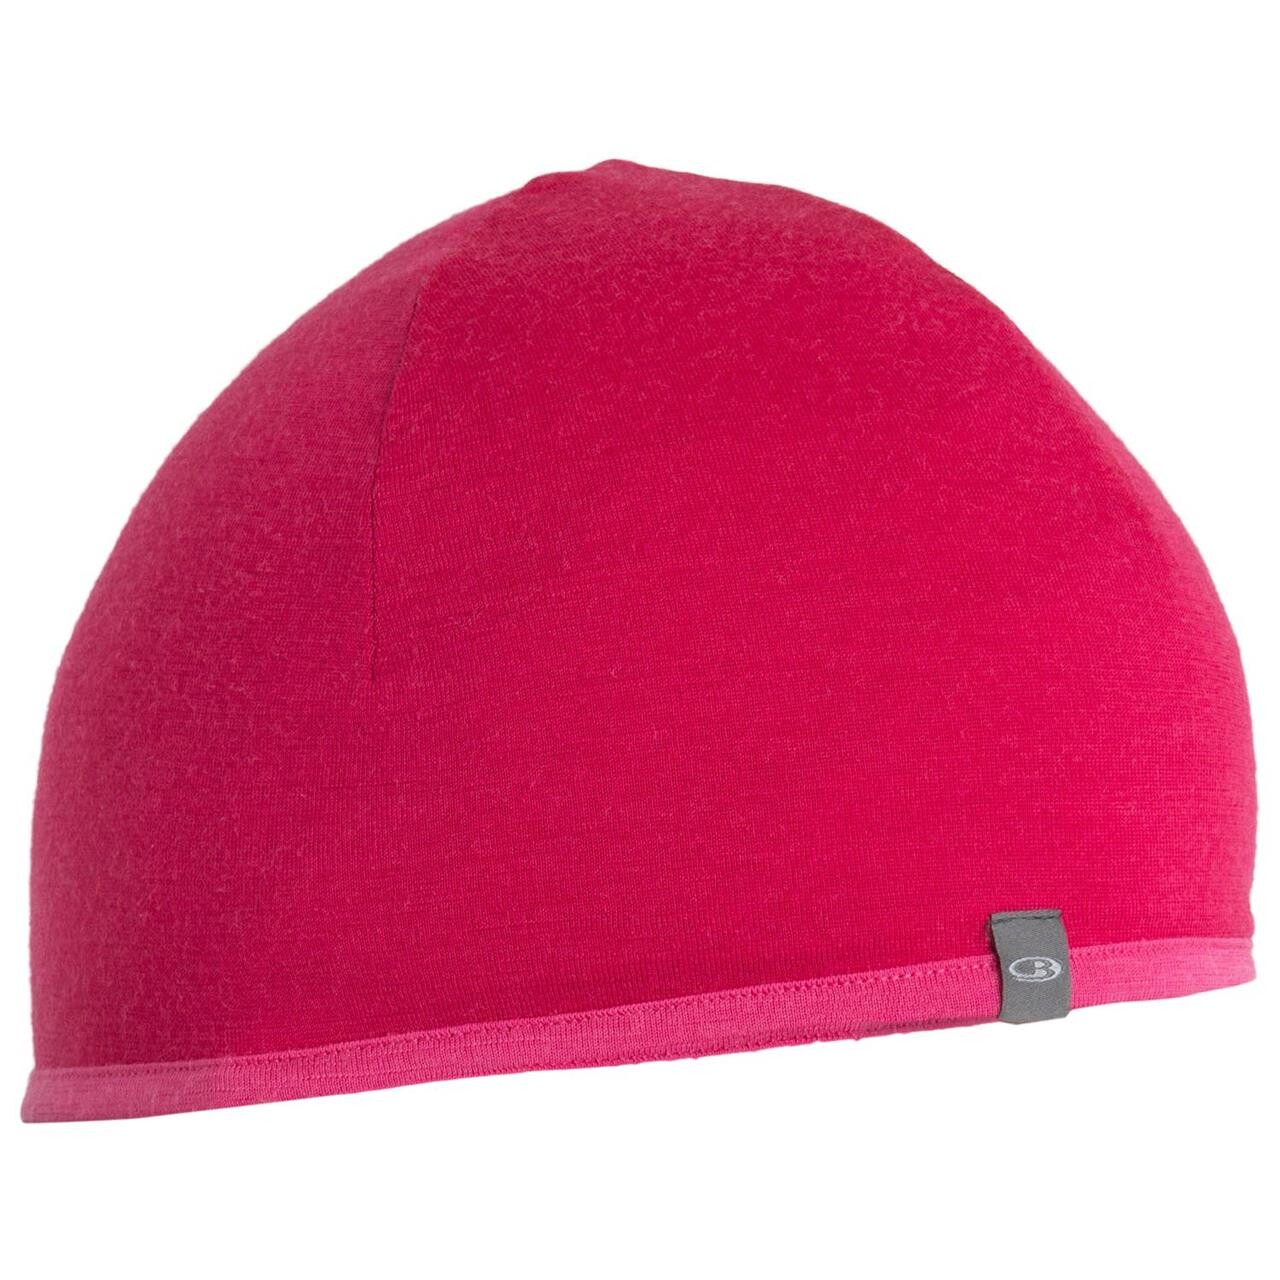 #2 - Icebreaker Pocket 200 Hat (Lyserød (ELECTRON PINK/TEMPO) One size)